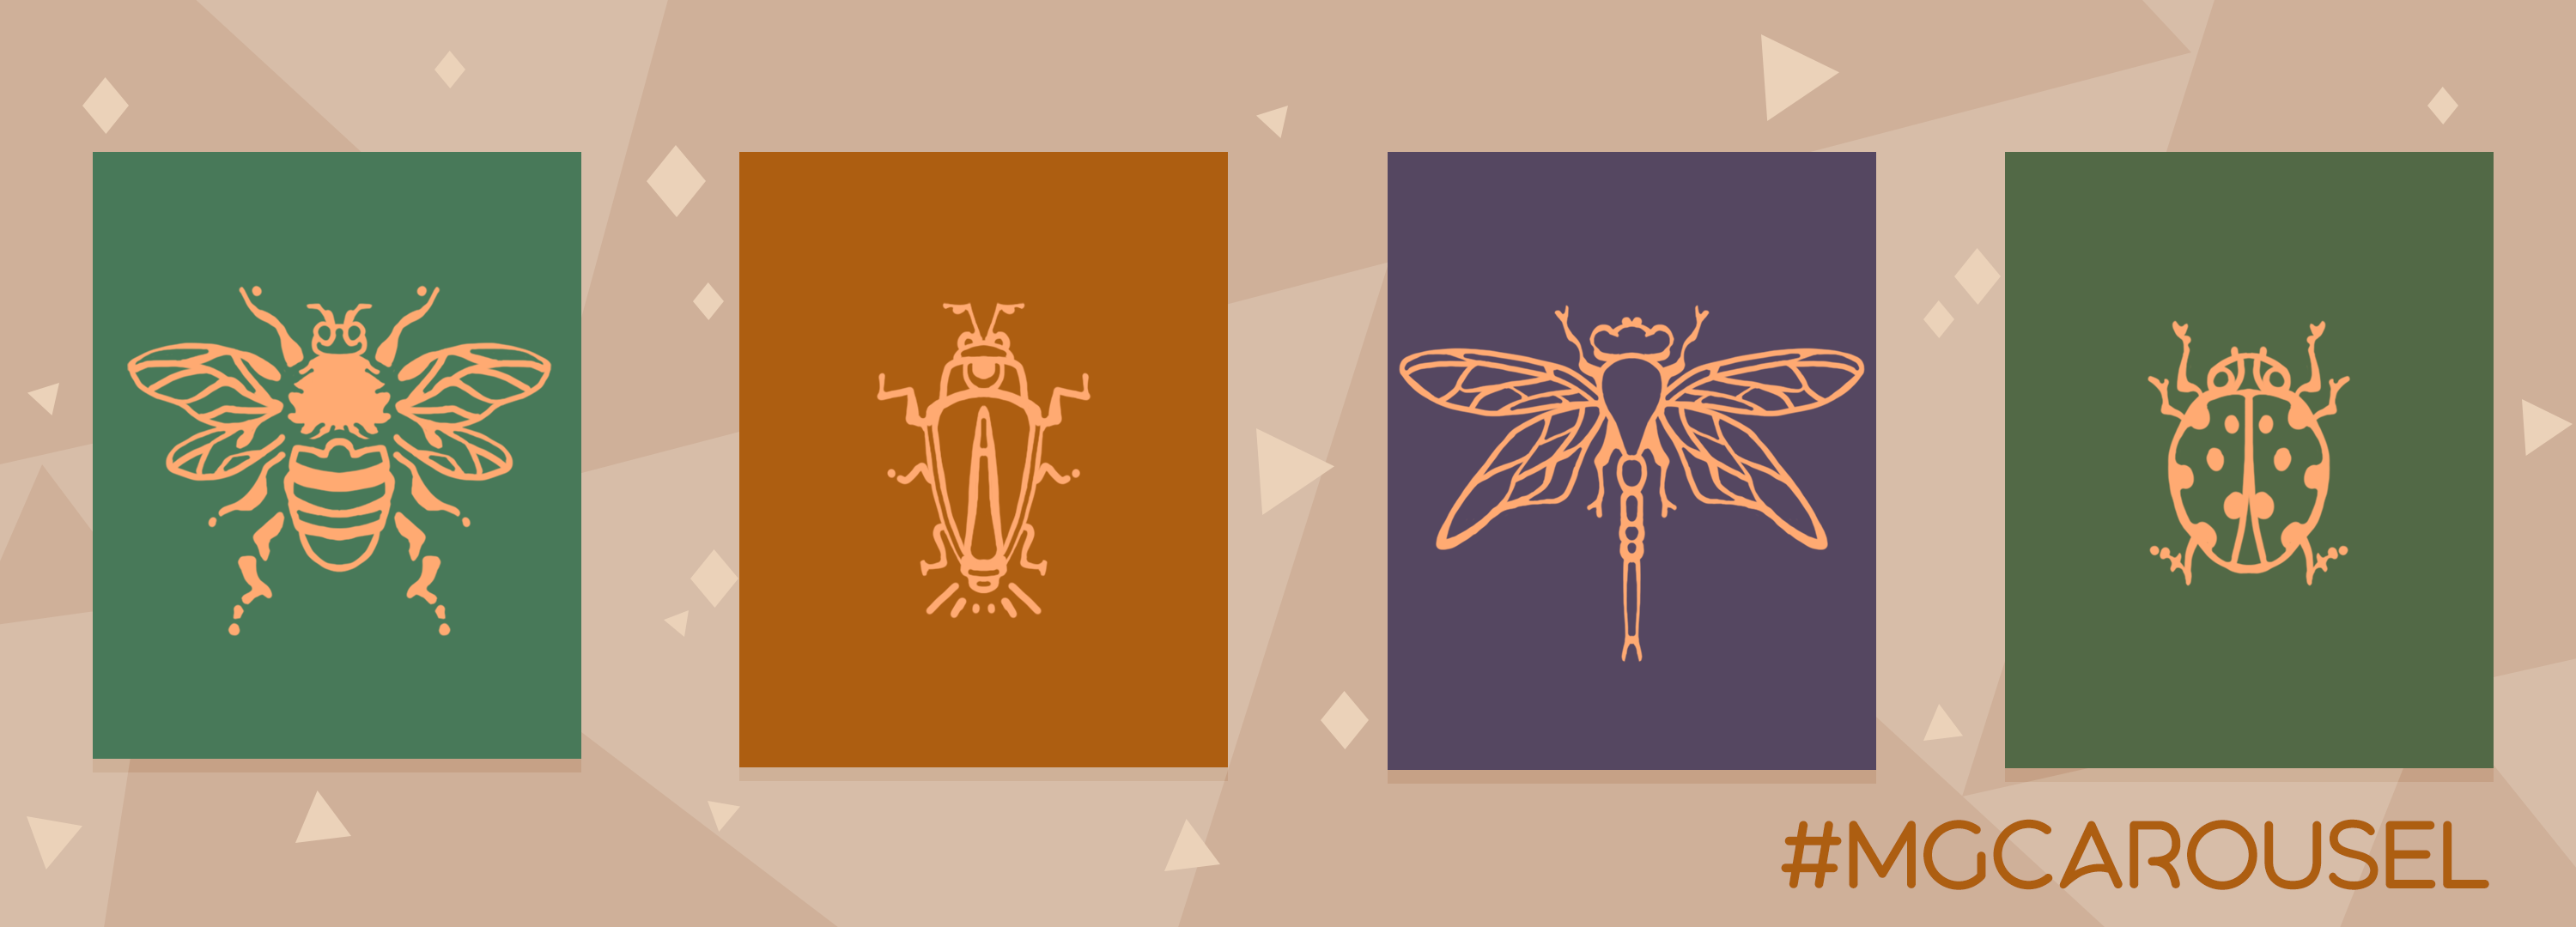 Bookmark for April 2022 features illustrations of insects, including a bee, lightening bug, dragonfly, and ladybug.